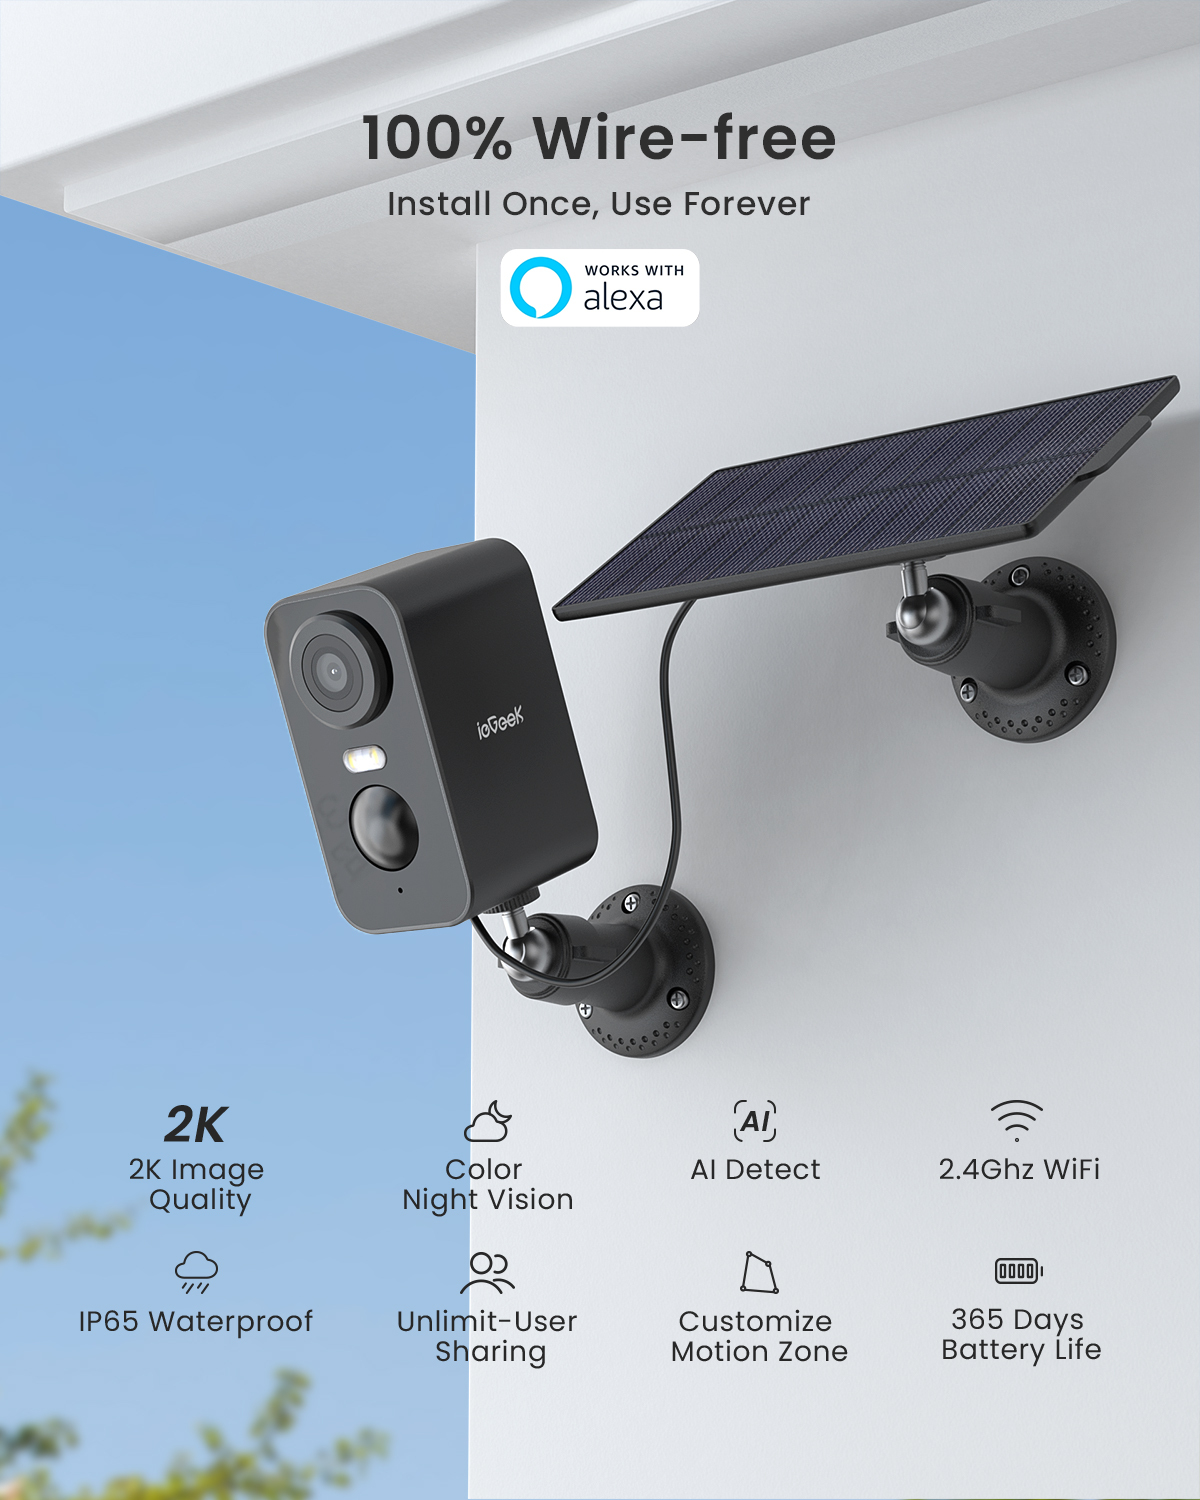 ieGeek Outdoor Solar Security Camera with Spotlight Siren, Wireless, WiFi, 2k/3mp Color Night Vision Outdoor Camera with AI Motion Detection, Work with Alexa (Supports Only 2.4Ghz Wi-Fi) - image 3 of 10